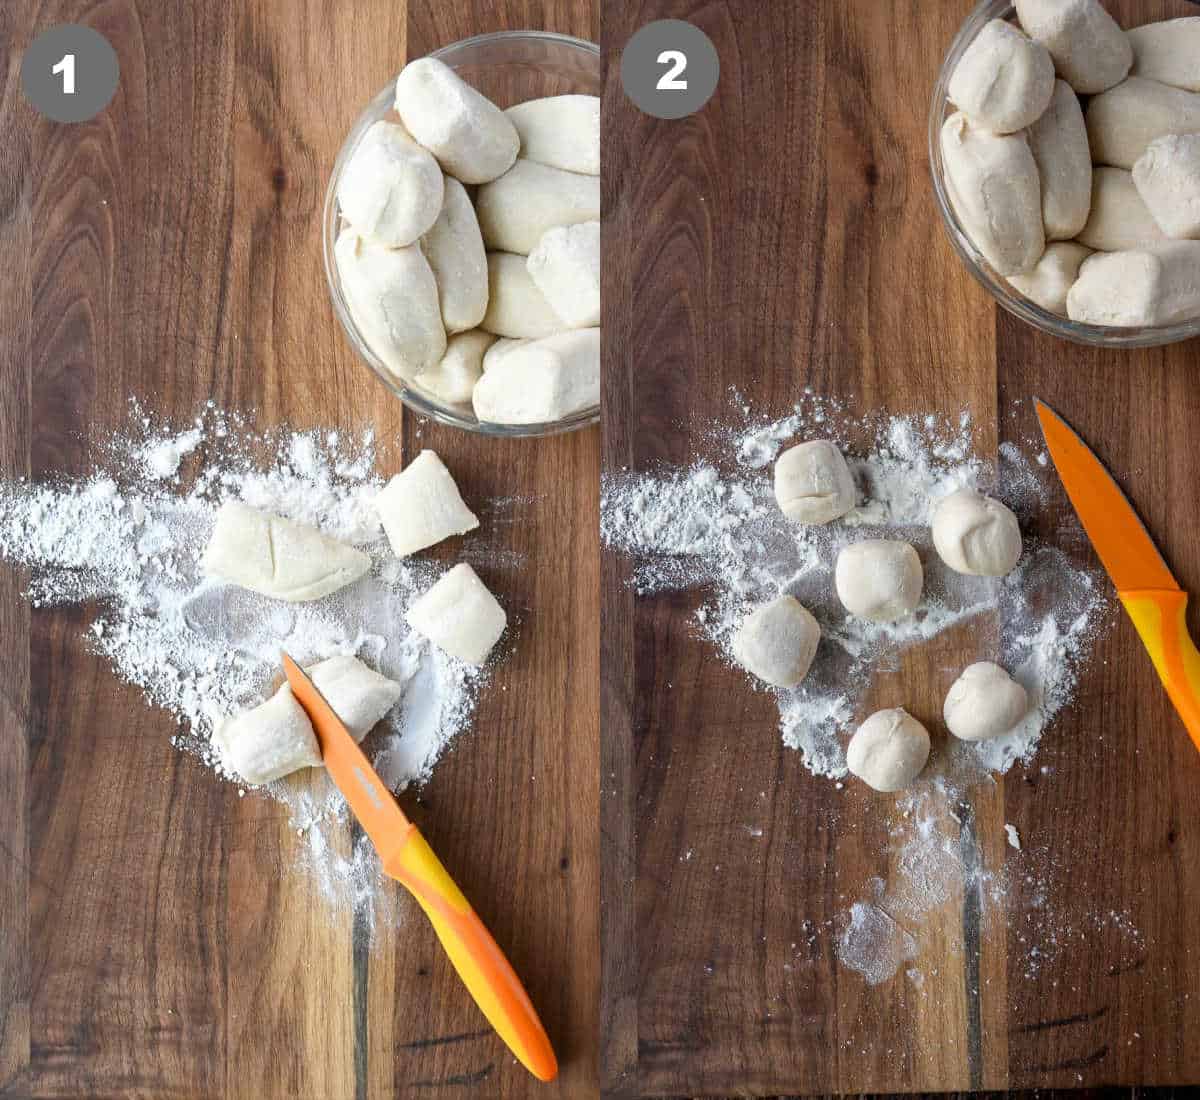 Thawed bread dough balls being cut in half then rolled in balls.